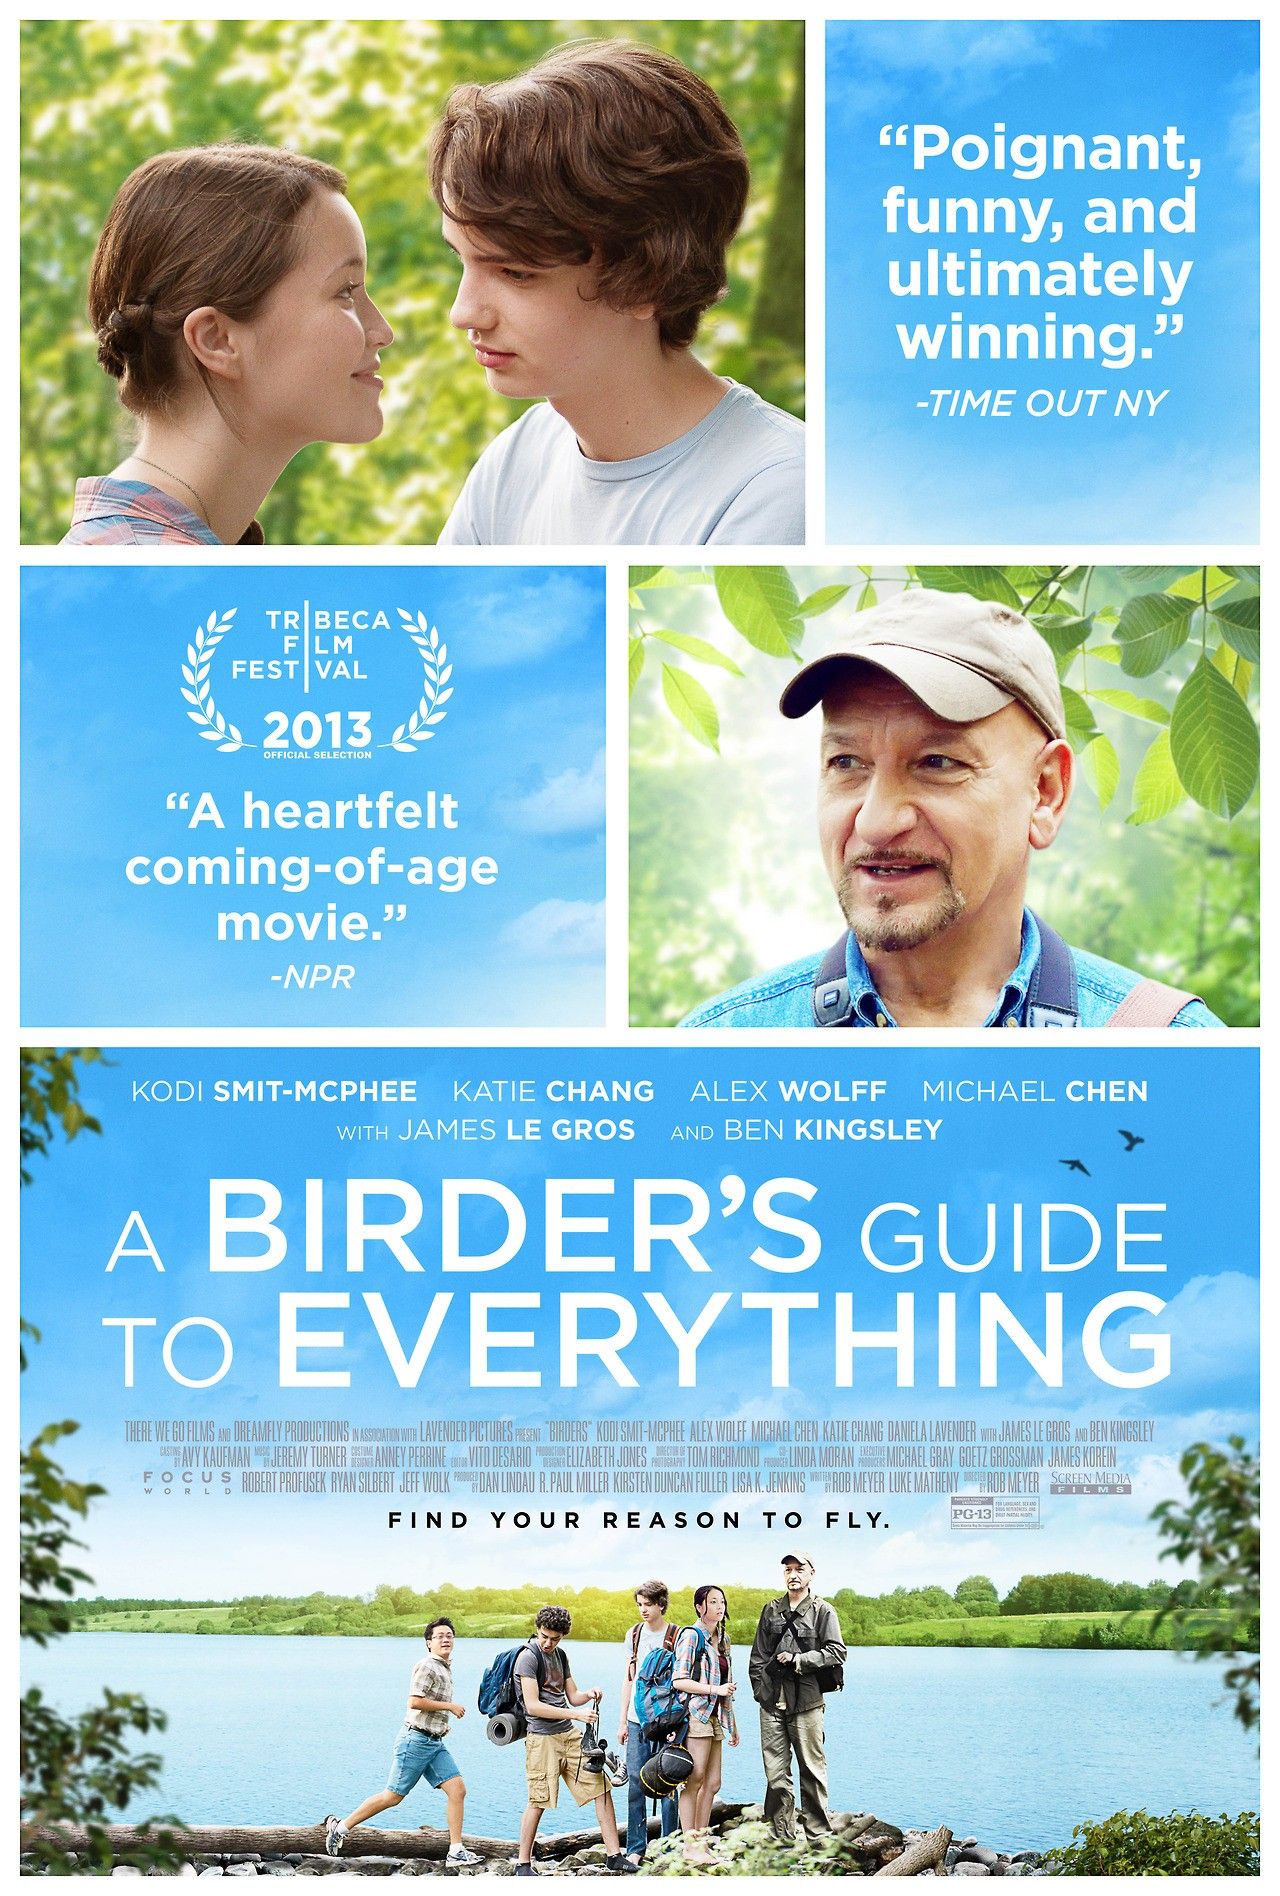 Poster of Focus World's A Birder's Guide to Everything (2014)